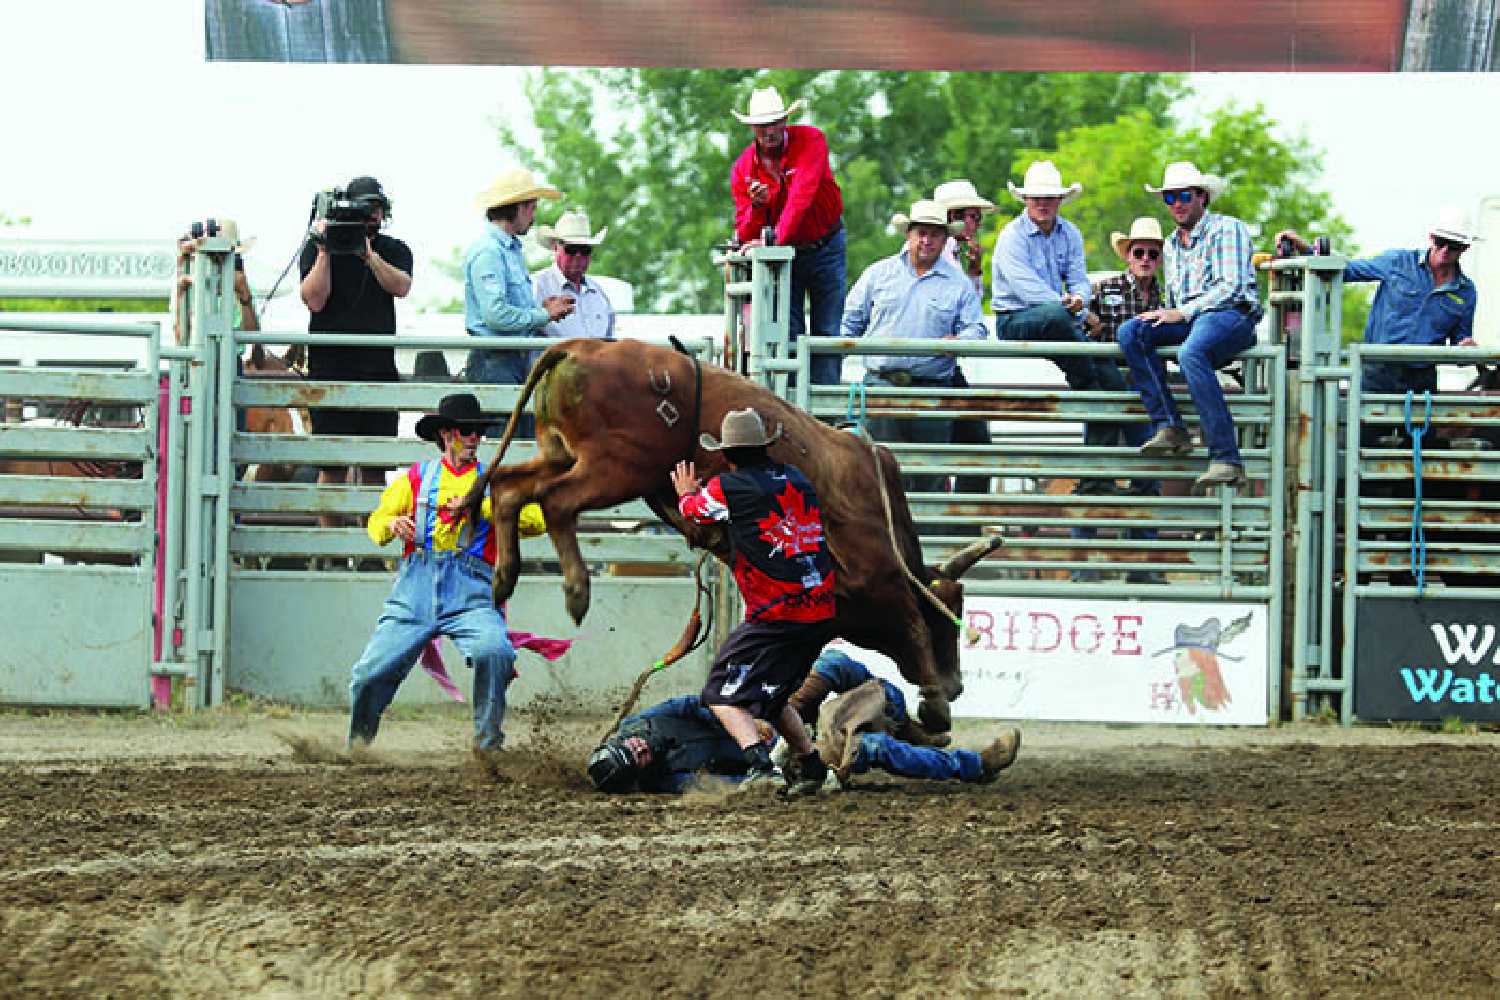 An action packed moment during last years bull riding event at Moose Mountain Rodeo.